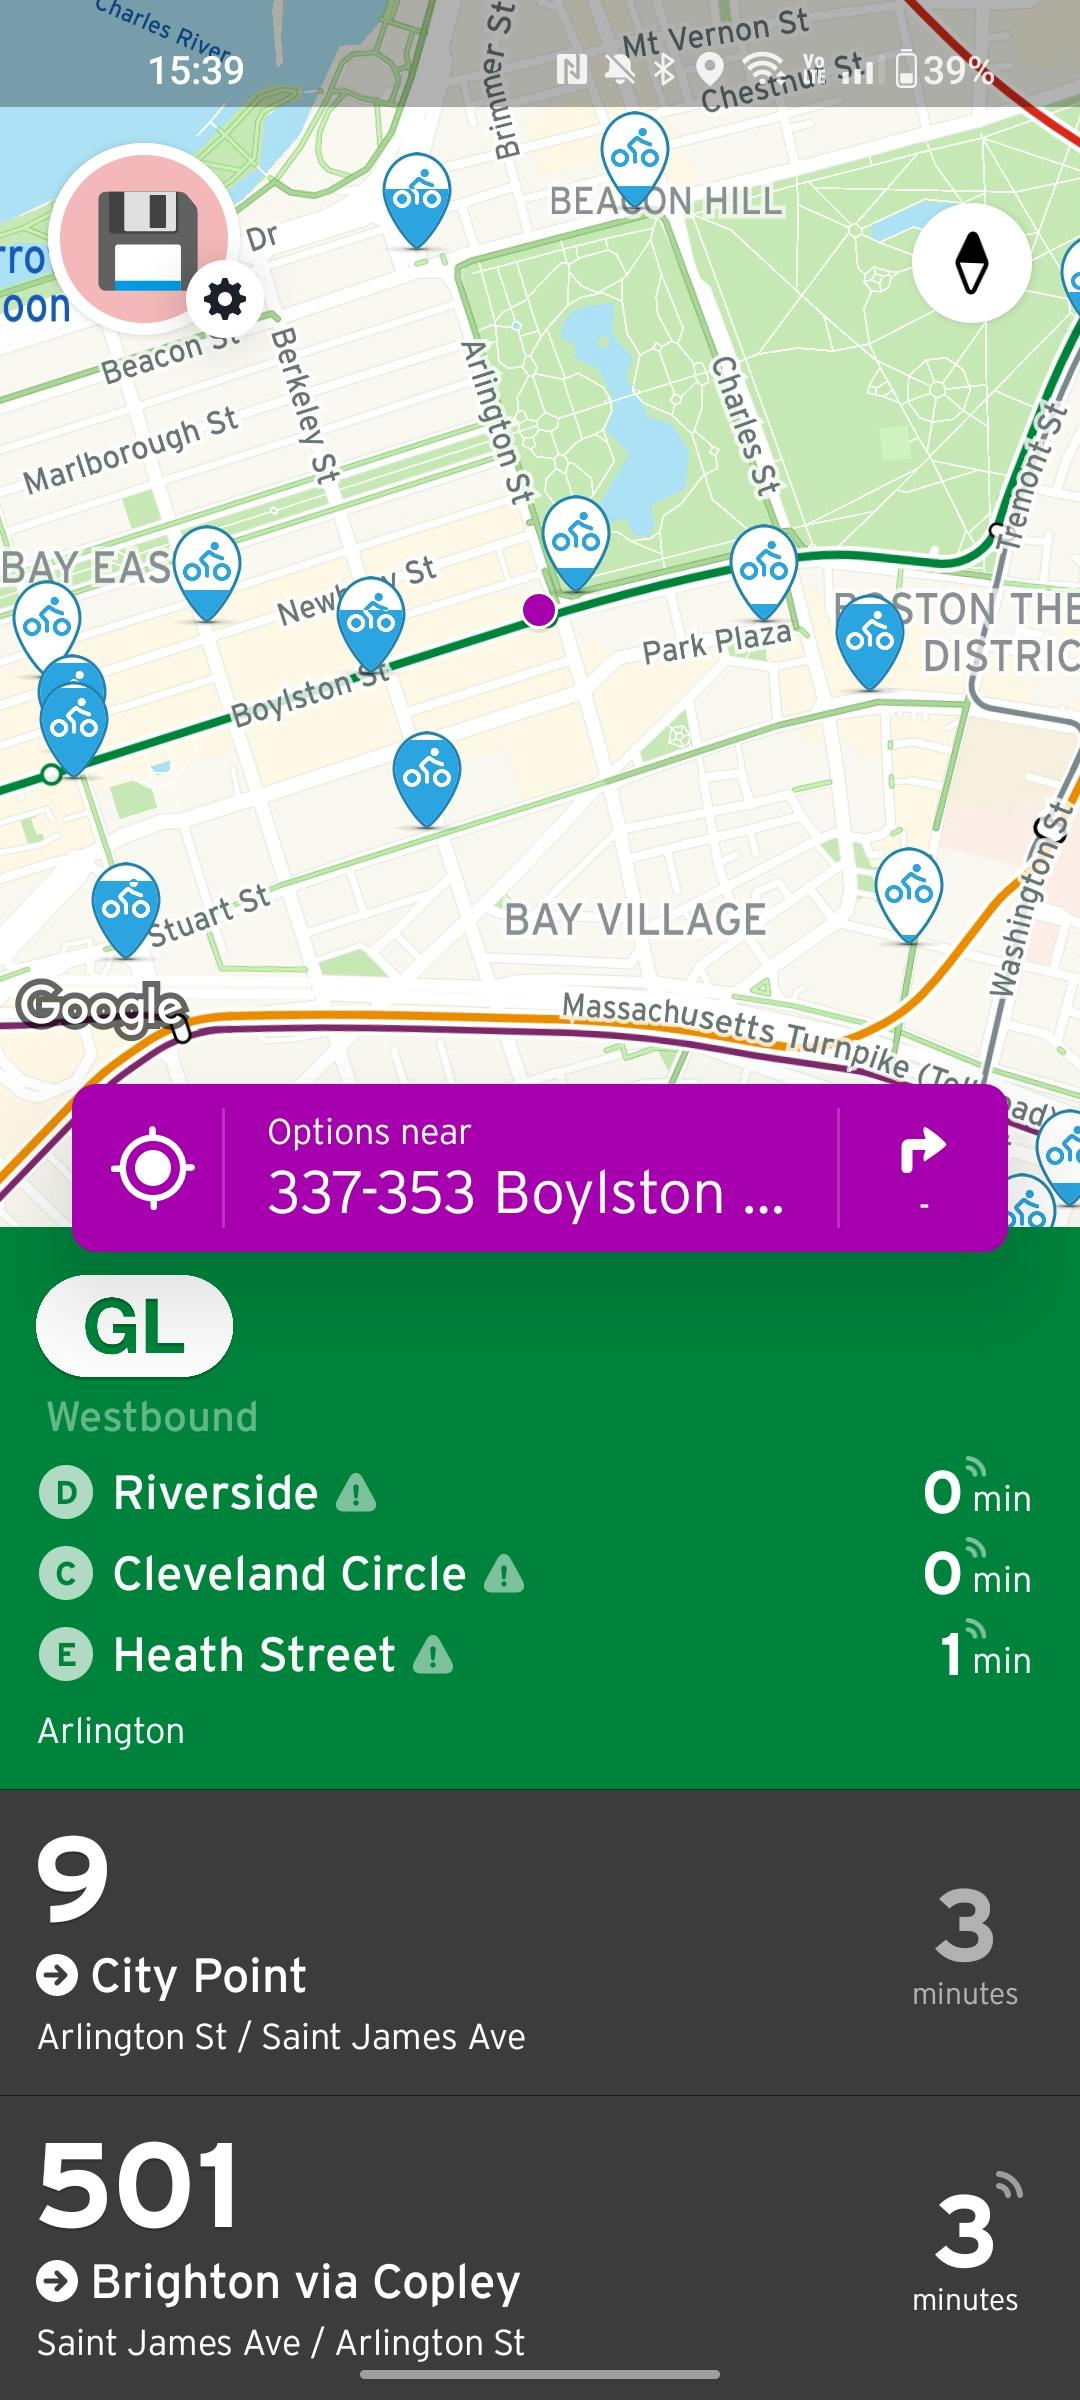 A screenshot of the app's interface, showing a map and a list of transit lines.